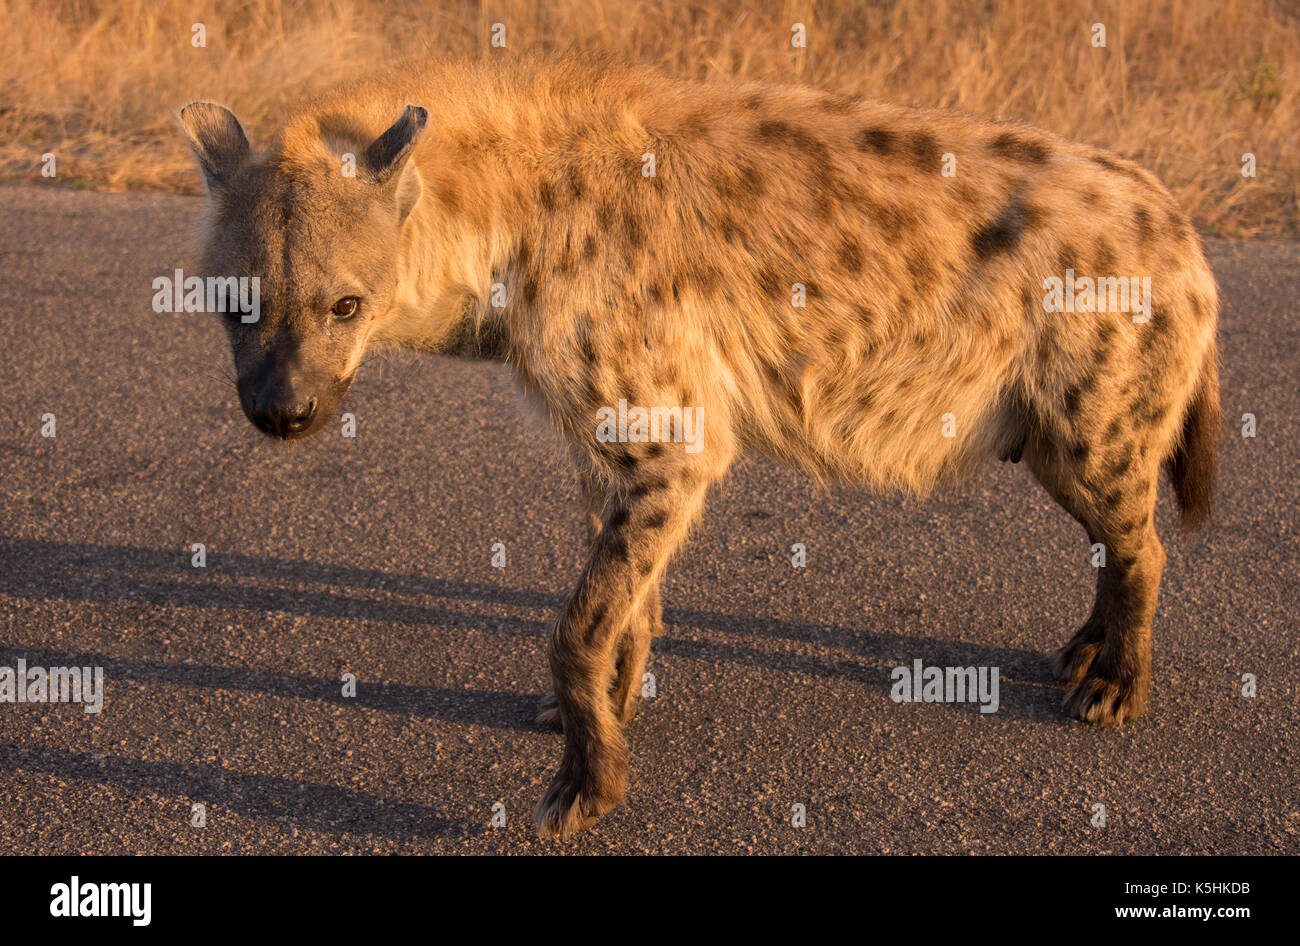 Spotted Hyena, Kruger National Park, South Africa Stock Photo